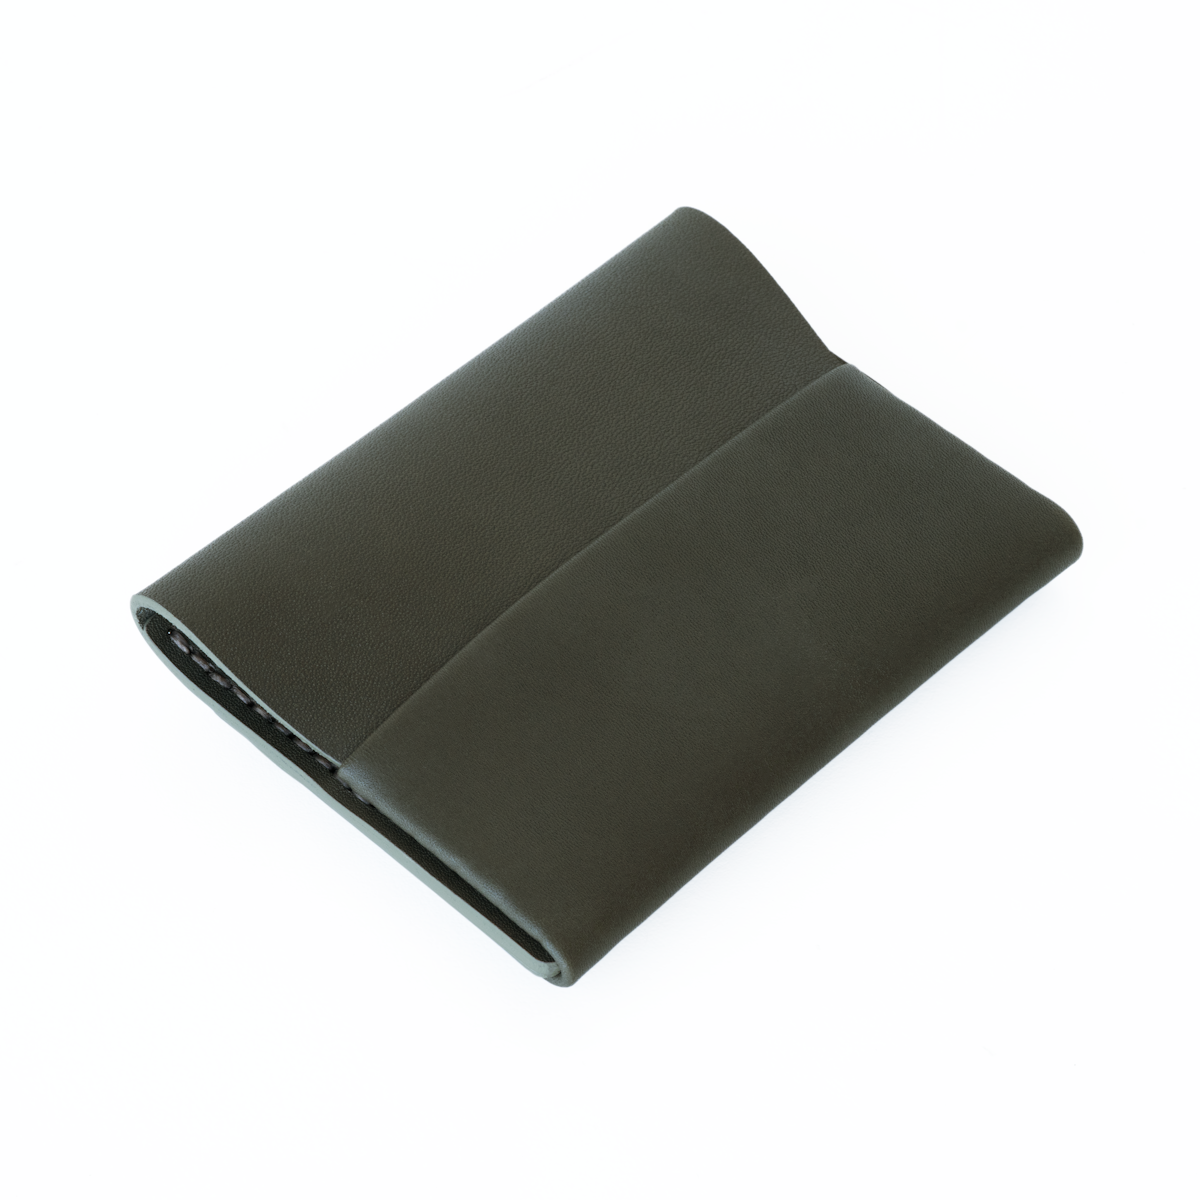 Folded Card Wallet in Smooth Leather - Black / Blue